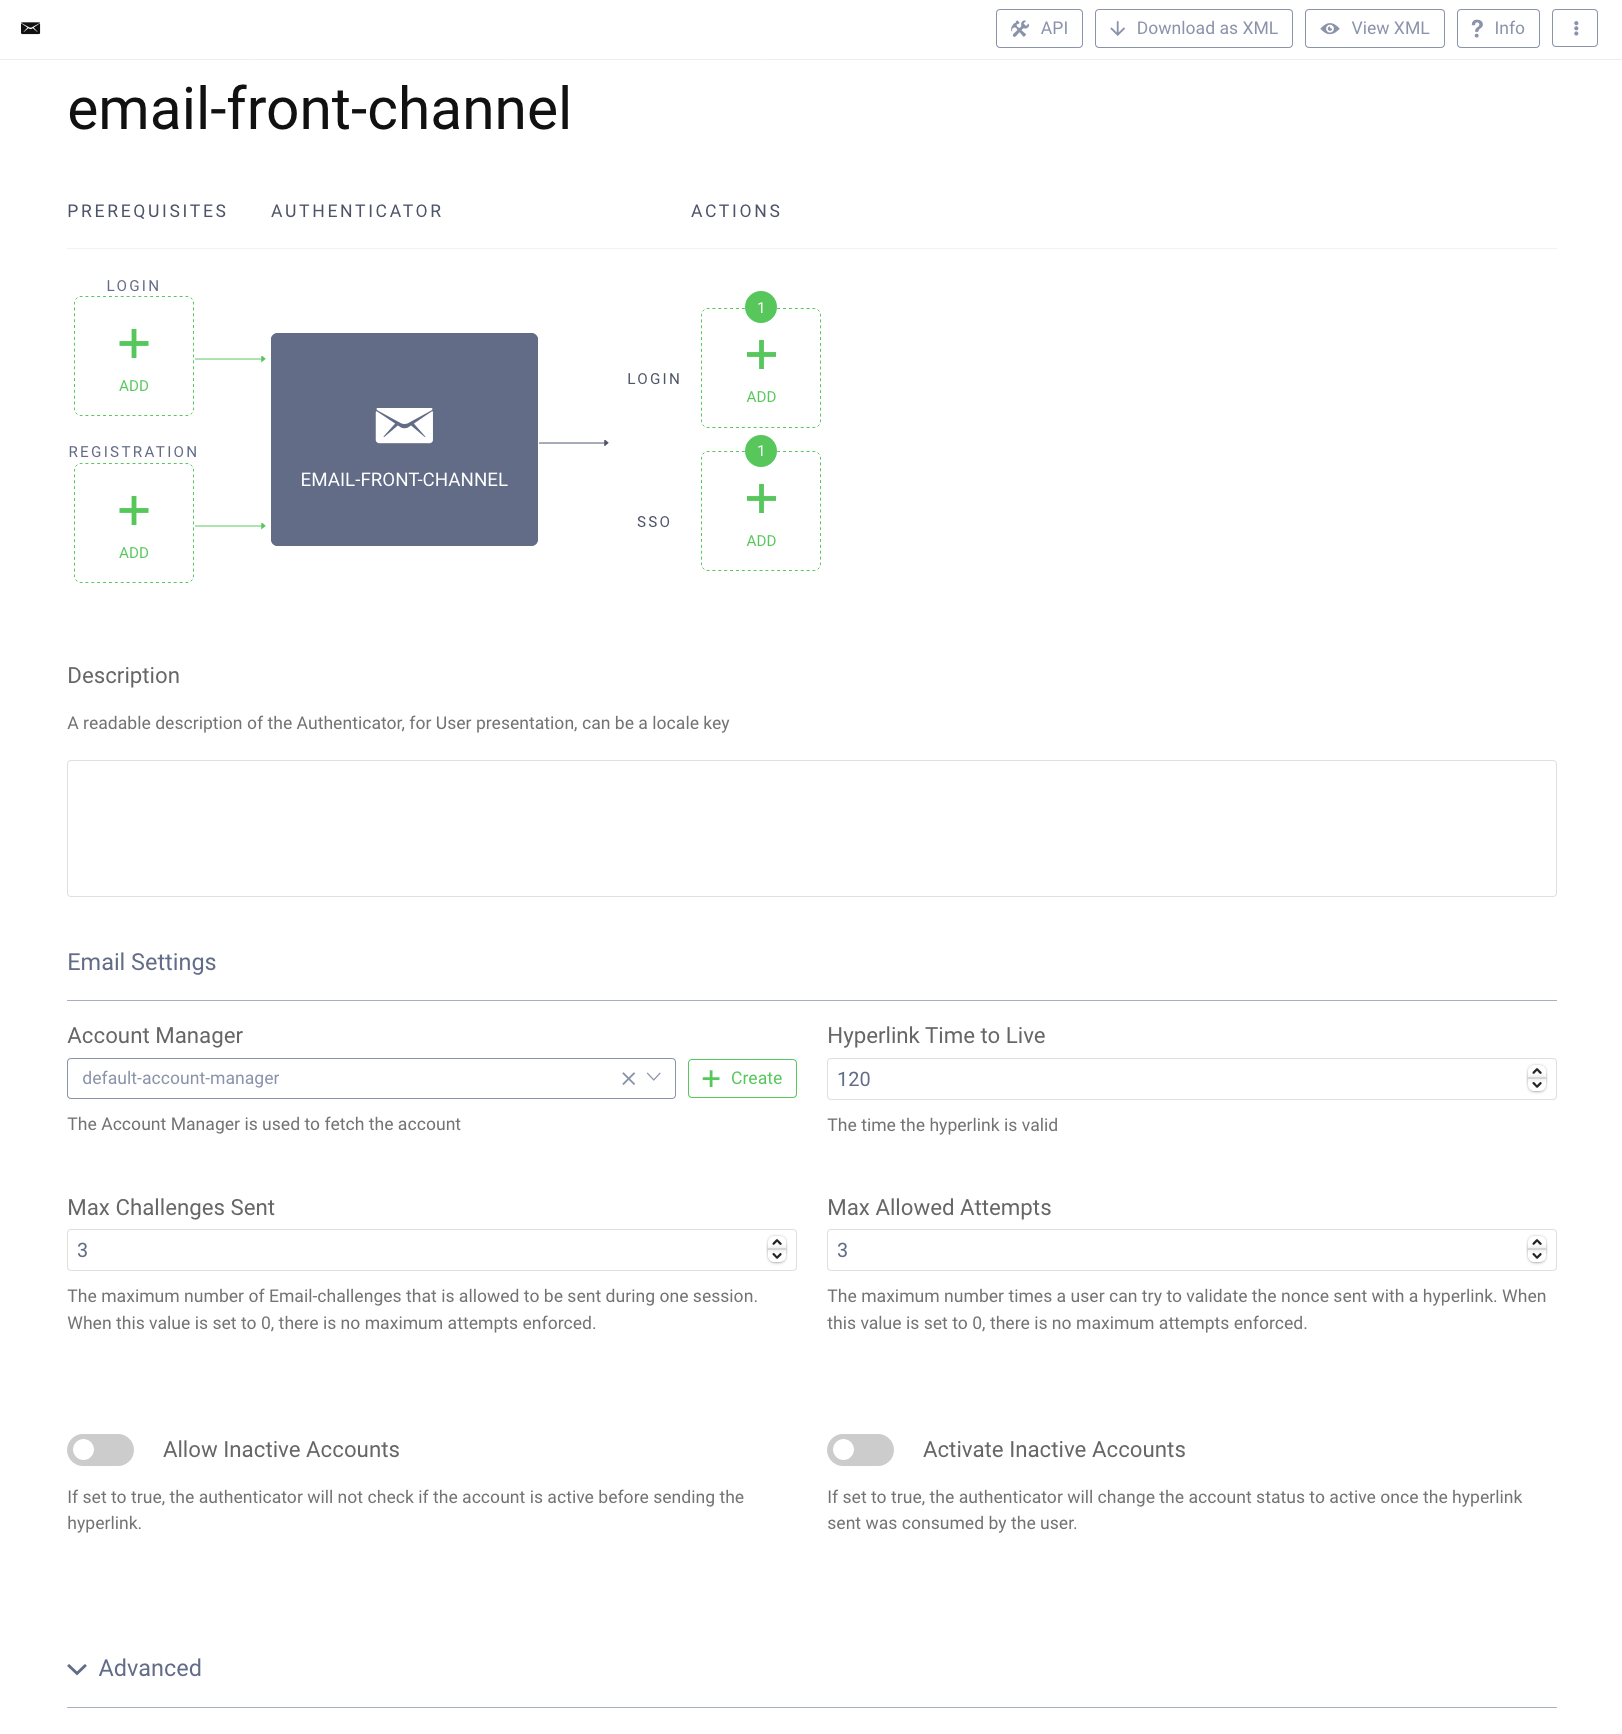 Email Front Channel